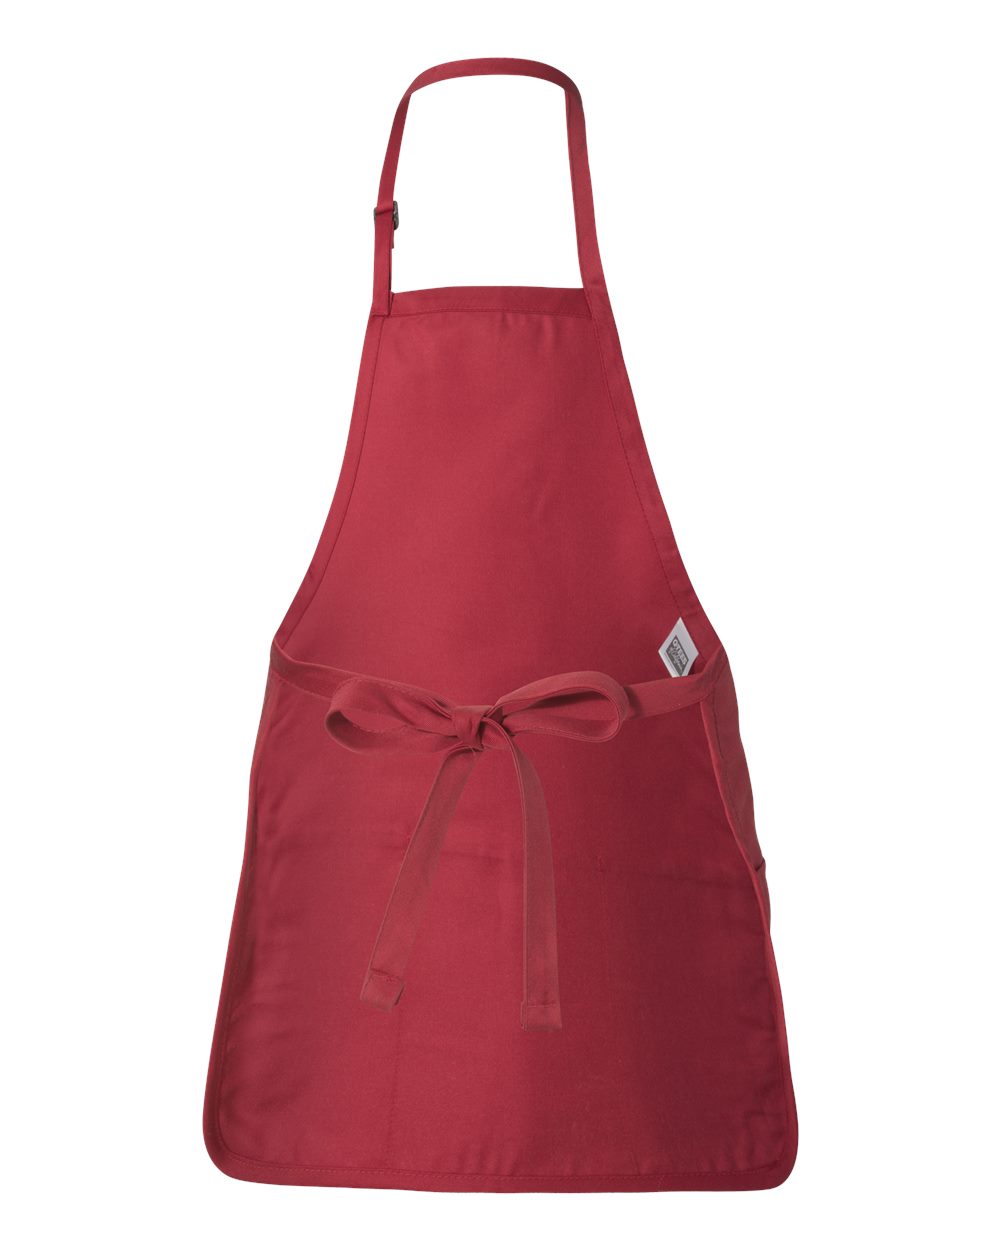 Q-Tees Full-Length Apron with Pouch Pocket Q4250 #color_Red